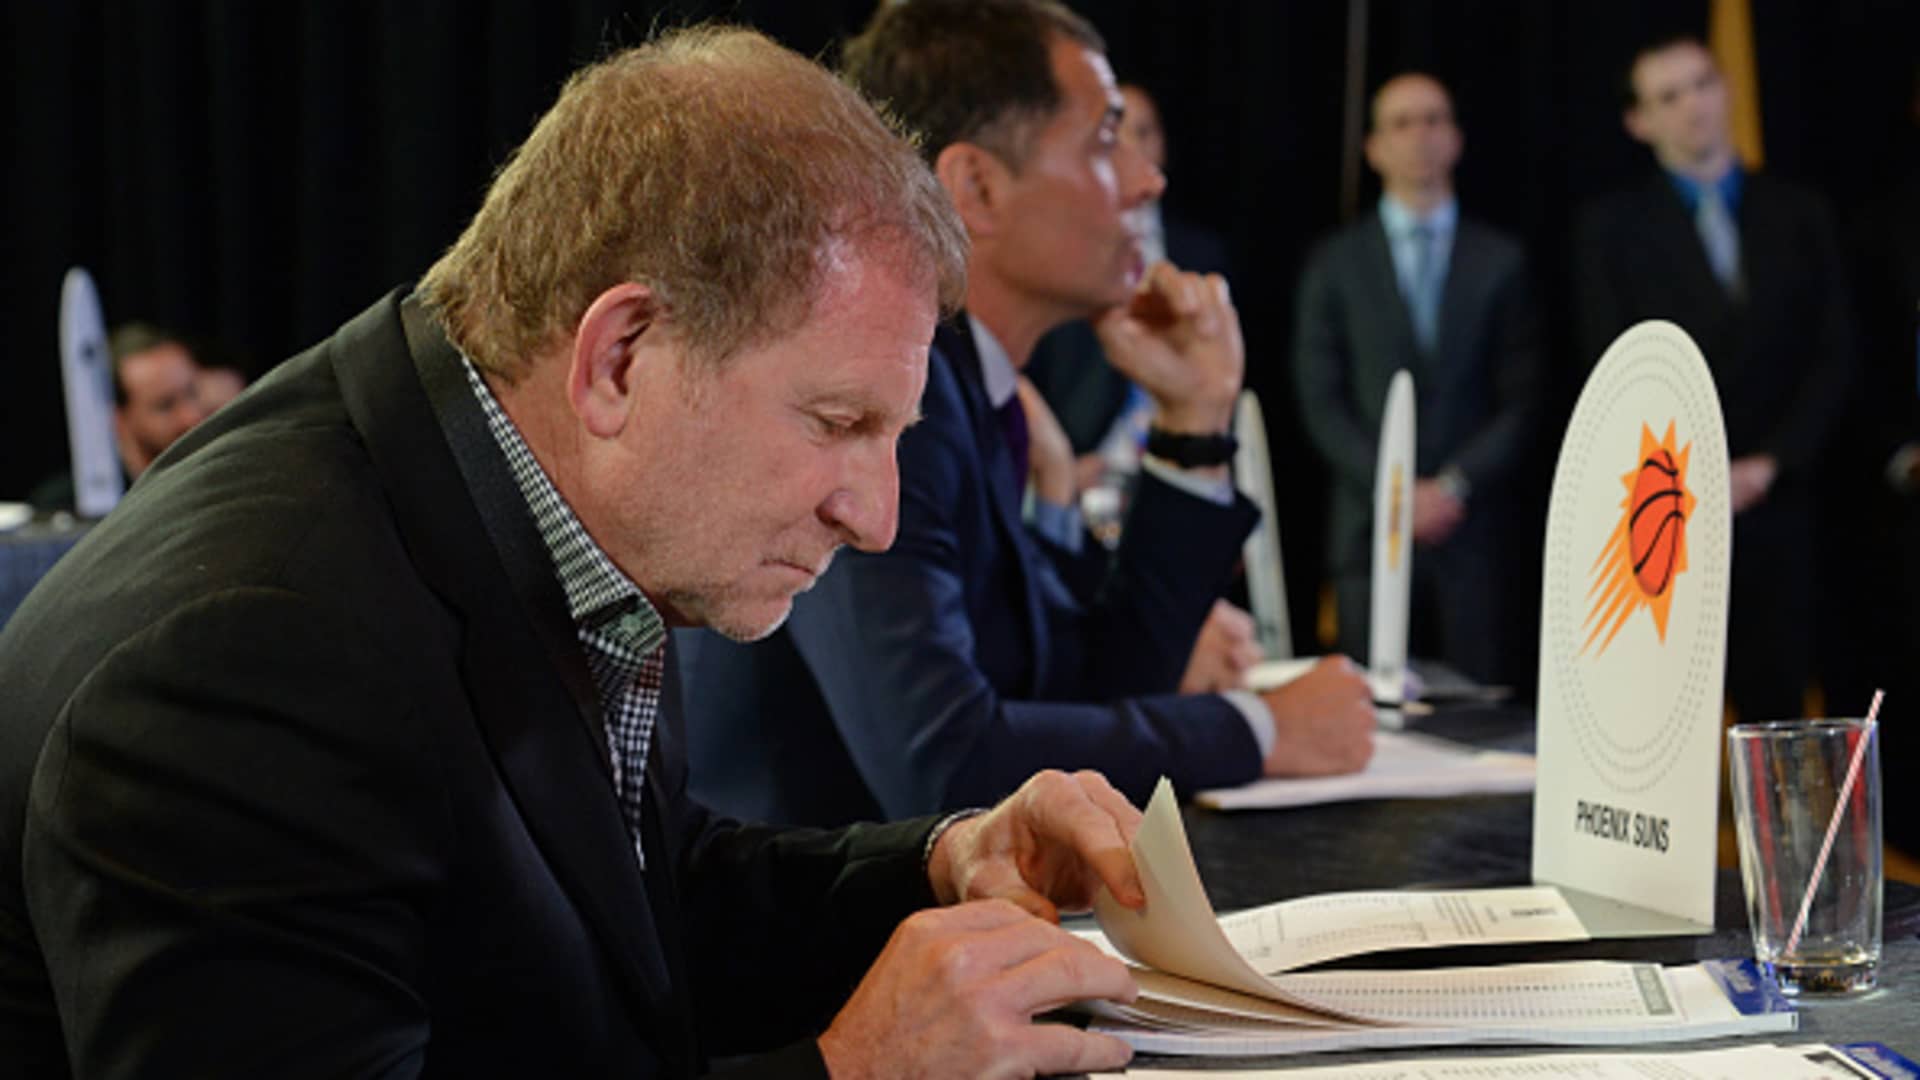 NBA suspends Suns owner Robert Sarver for using racial slurs, harassing employees